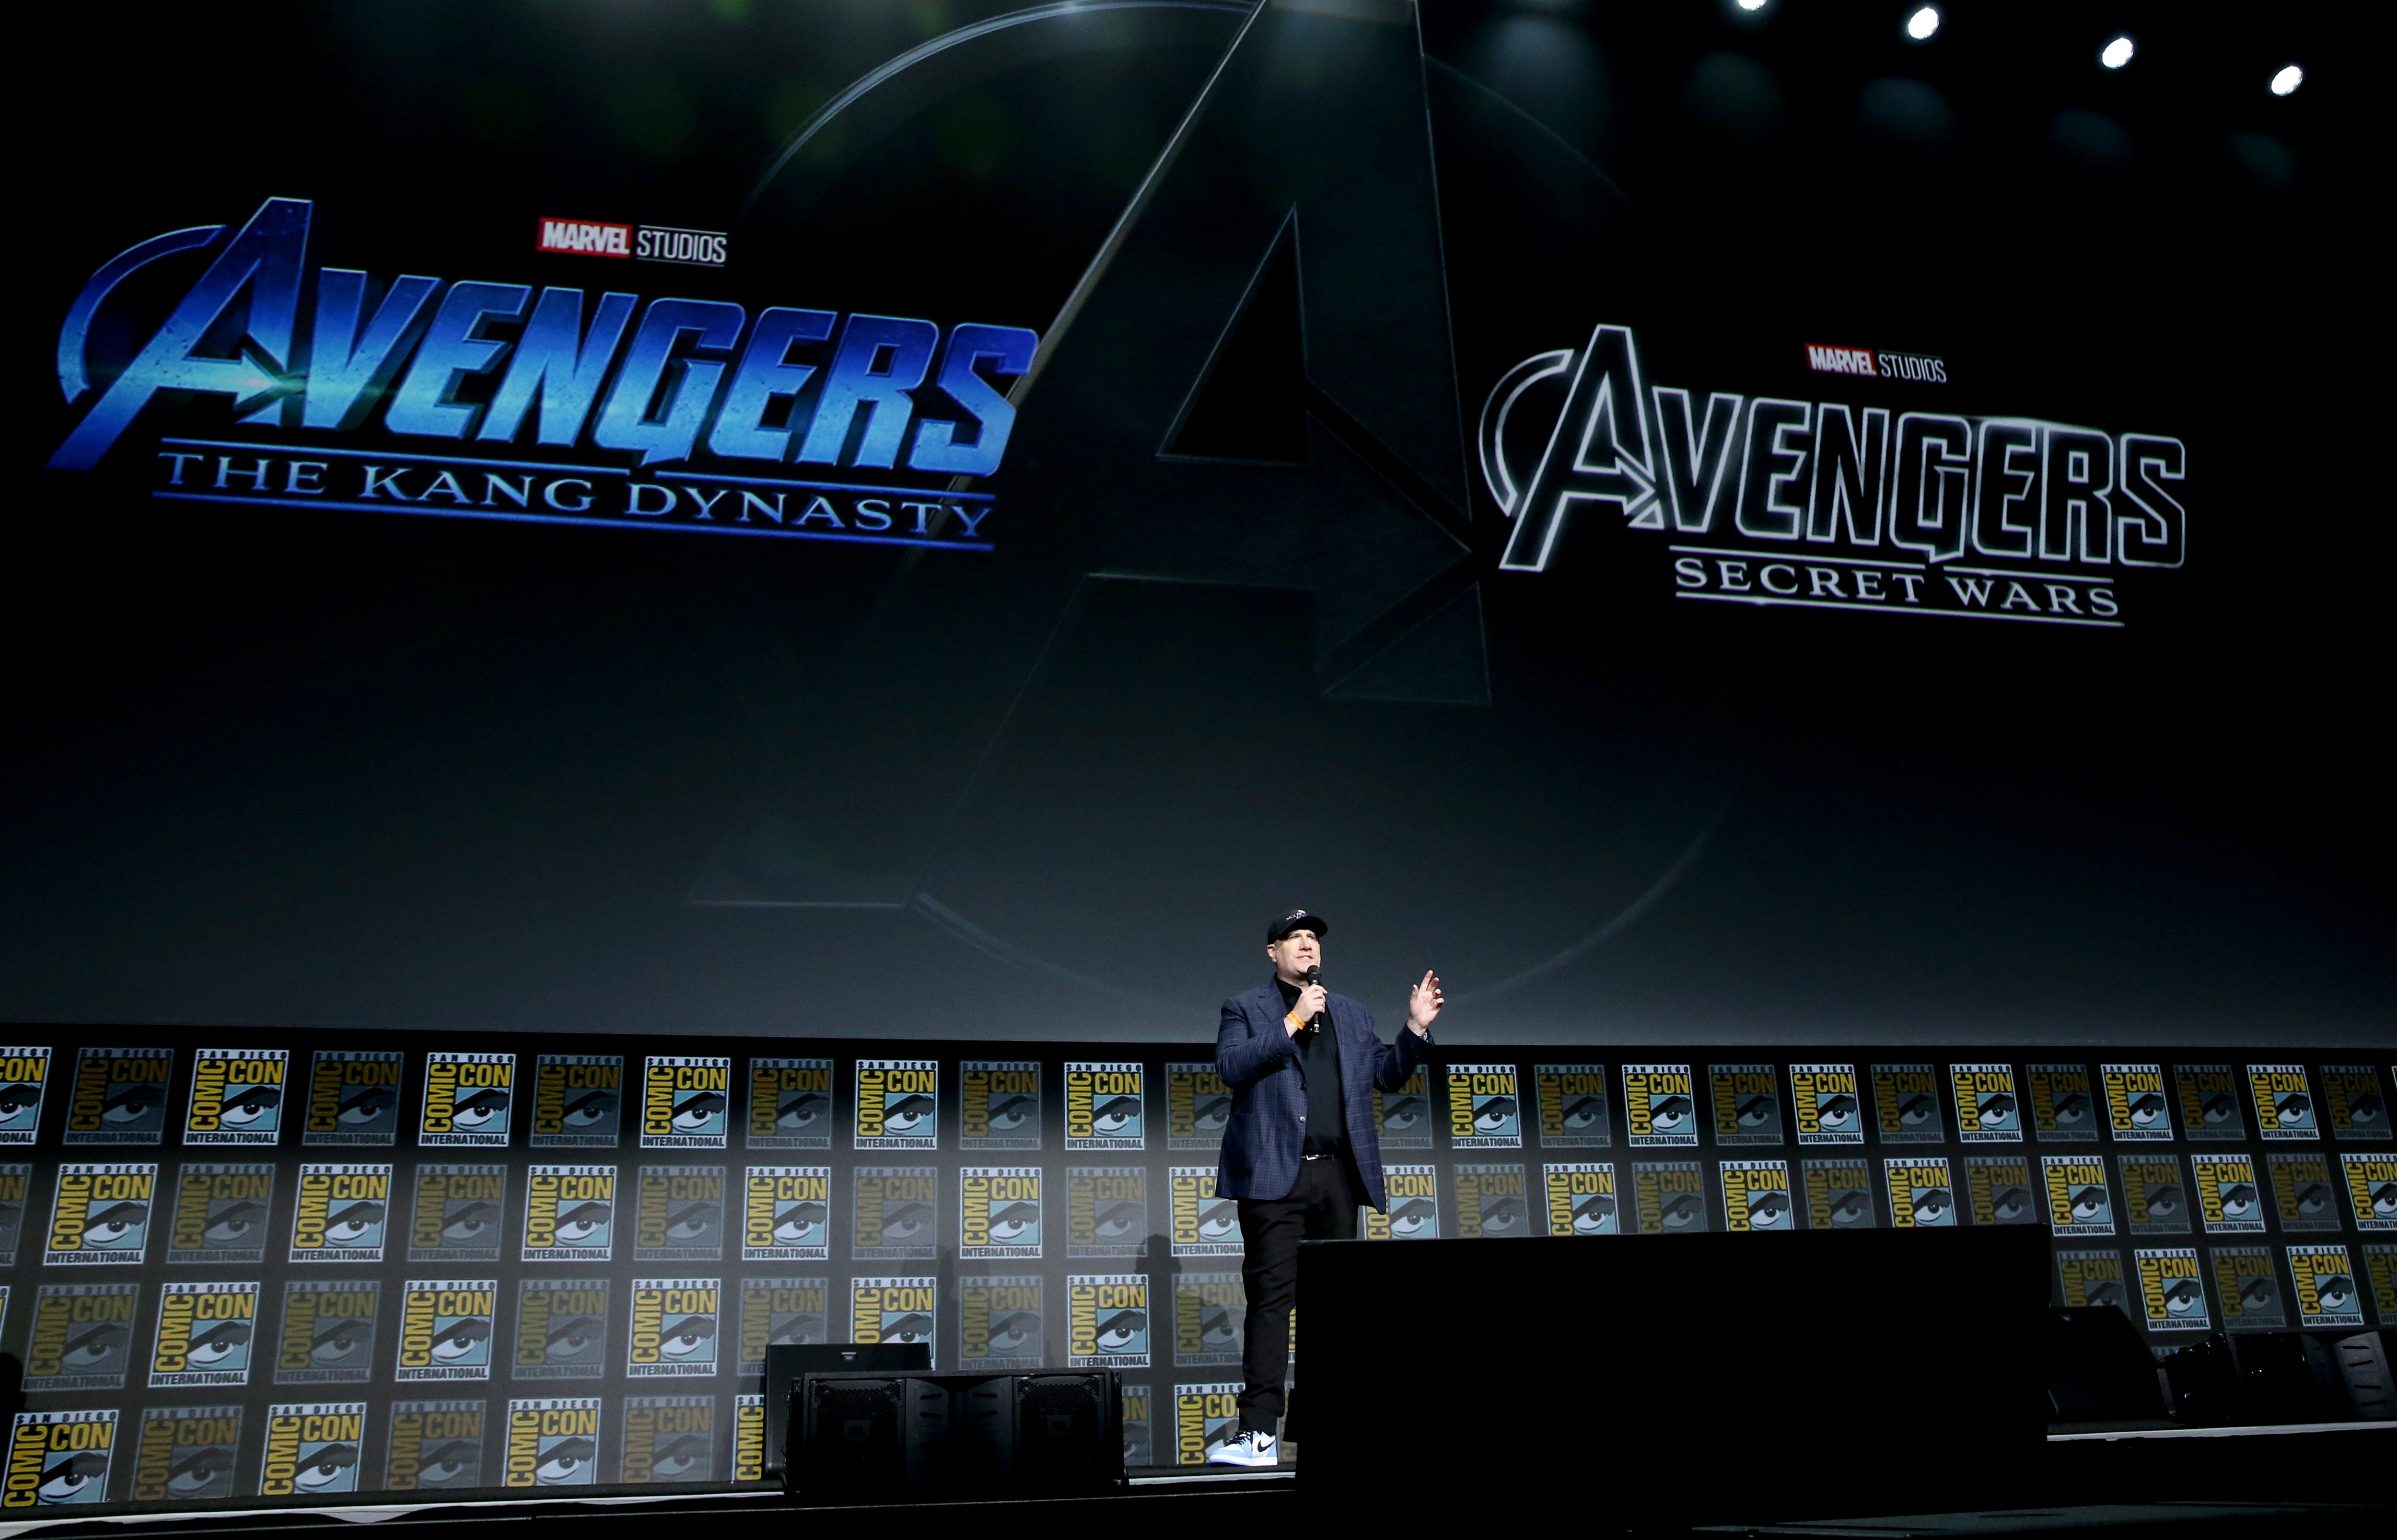 Kevin Feige, who announced 'Fantastic Four' but not the cast at San Diego Comic-Con 2022, stands onstage. Feige wears a dark blue suit over a black shirt, black pants, and a black baseball hat.